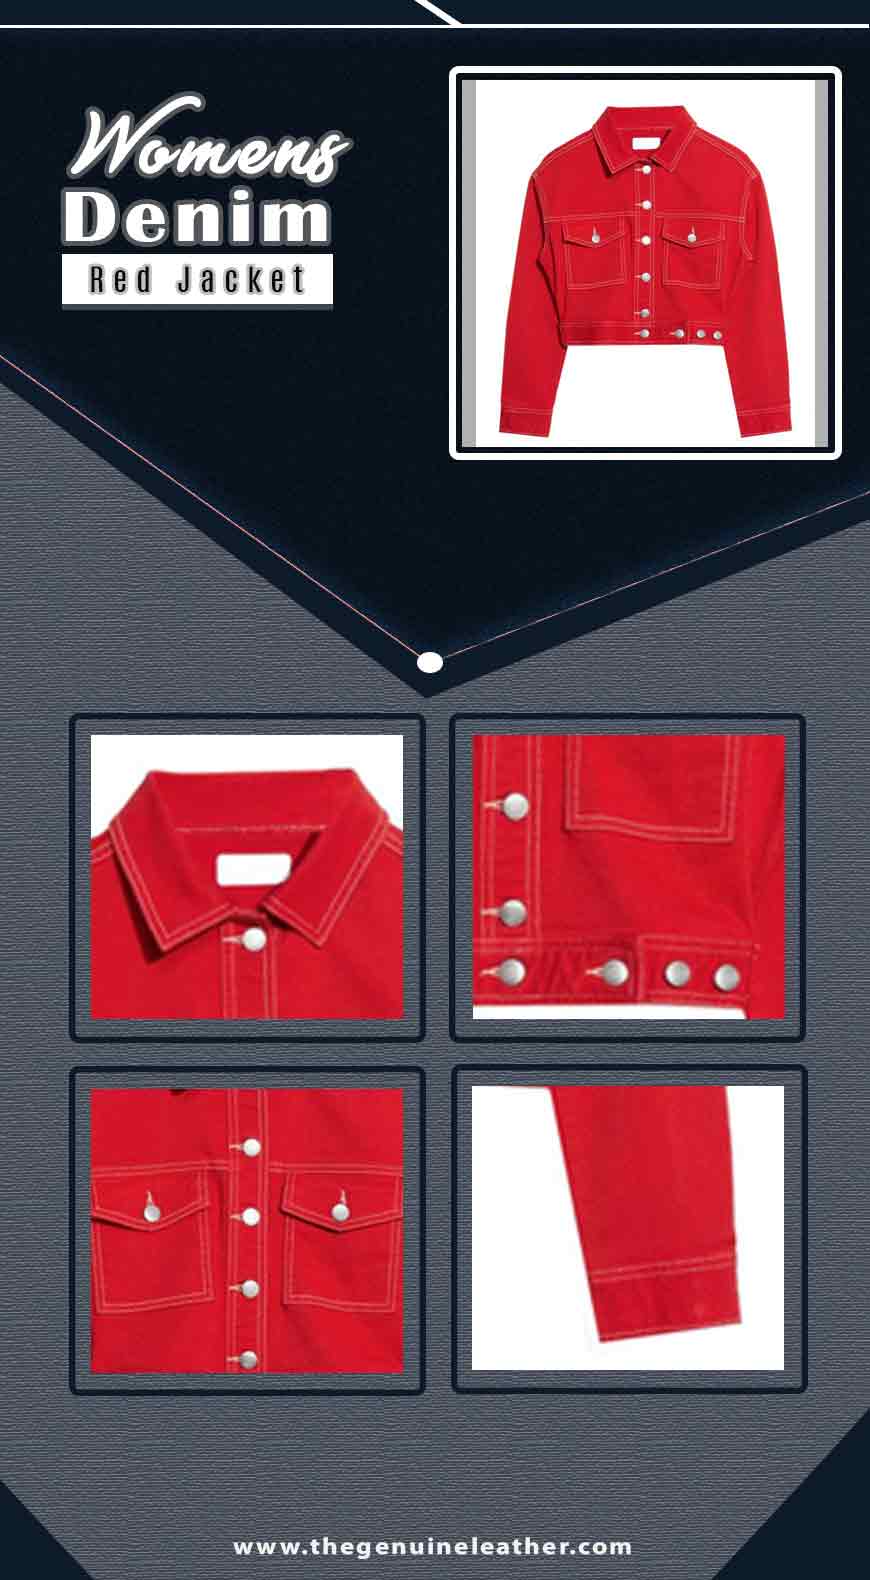 Womens Denim Red Jacket Infography